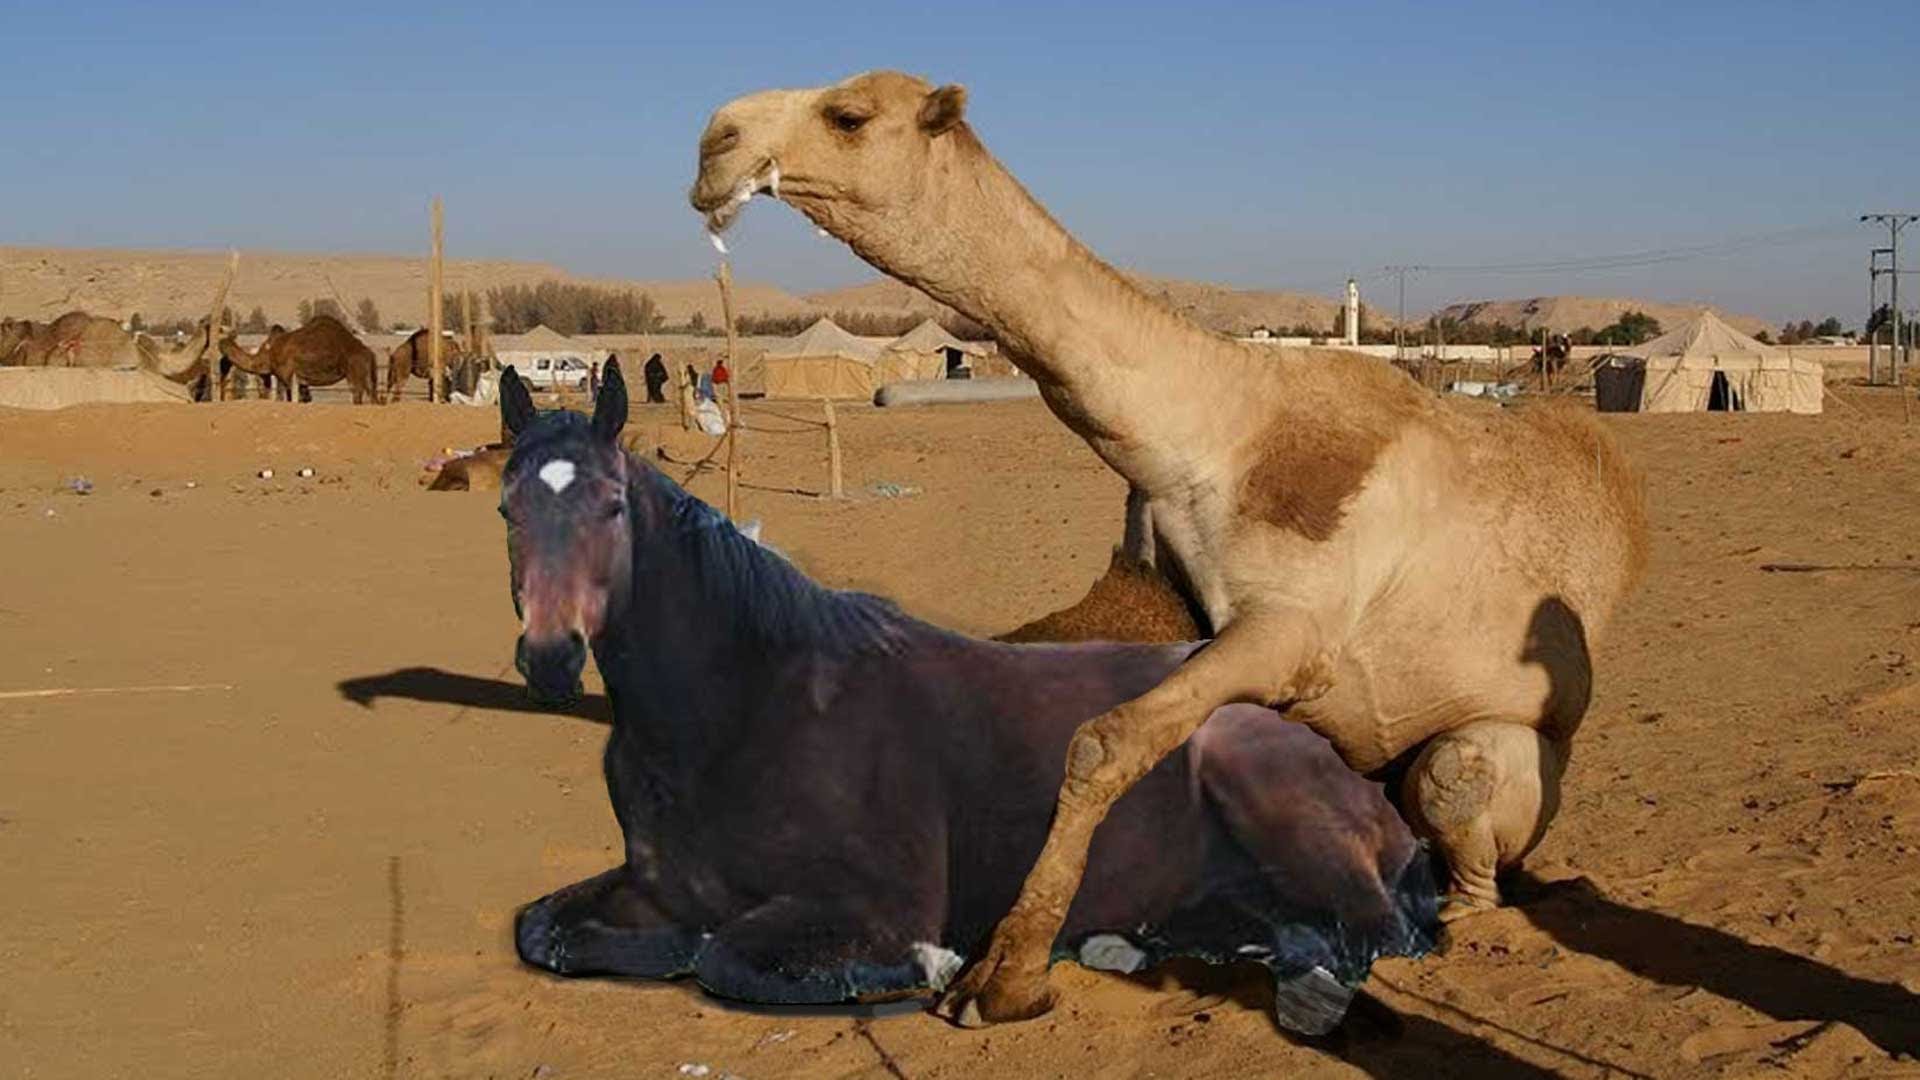 CAMEL MATING WITH HORSE - YouTube